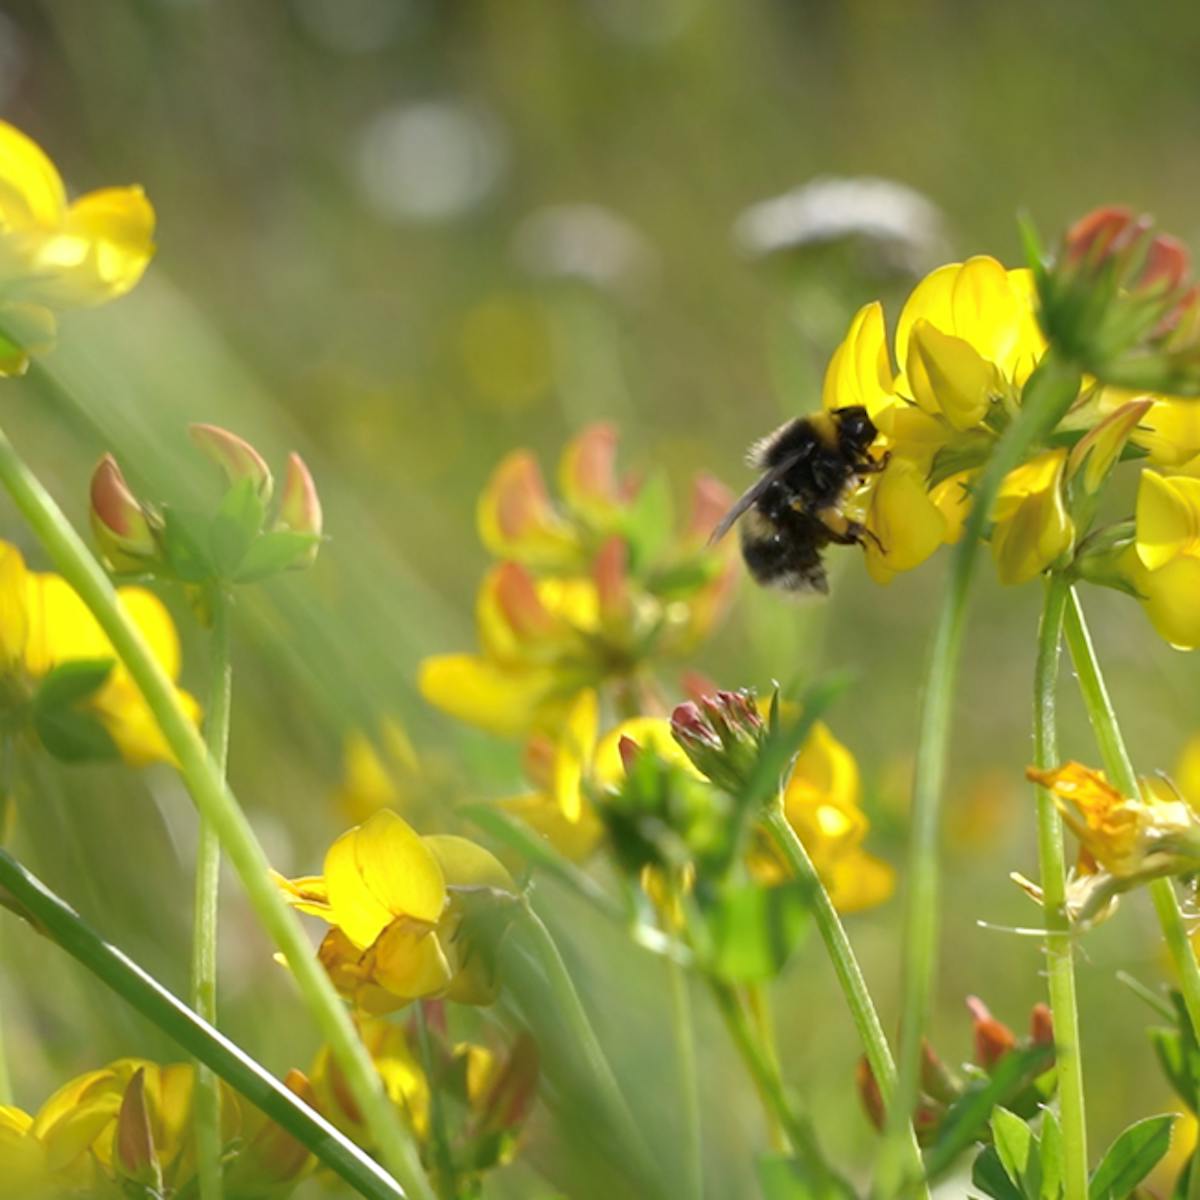 Photograph showing yellow flowers. A bumblebee is shown next to one of the flowers. 